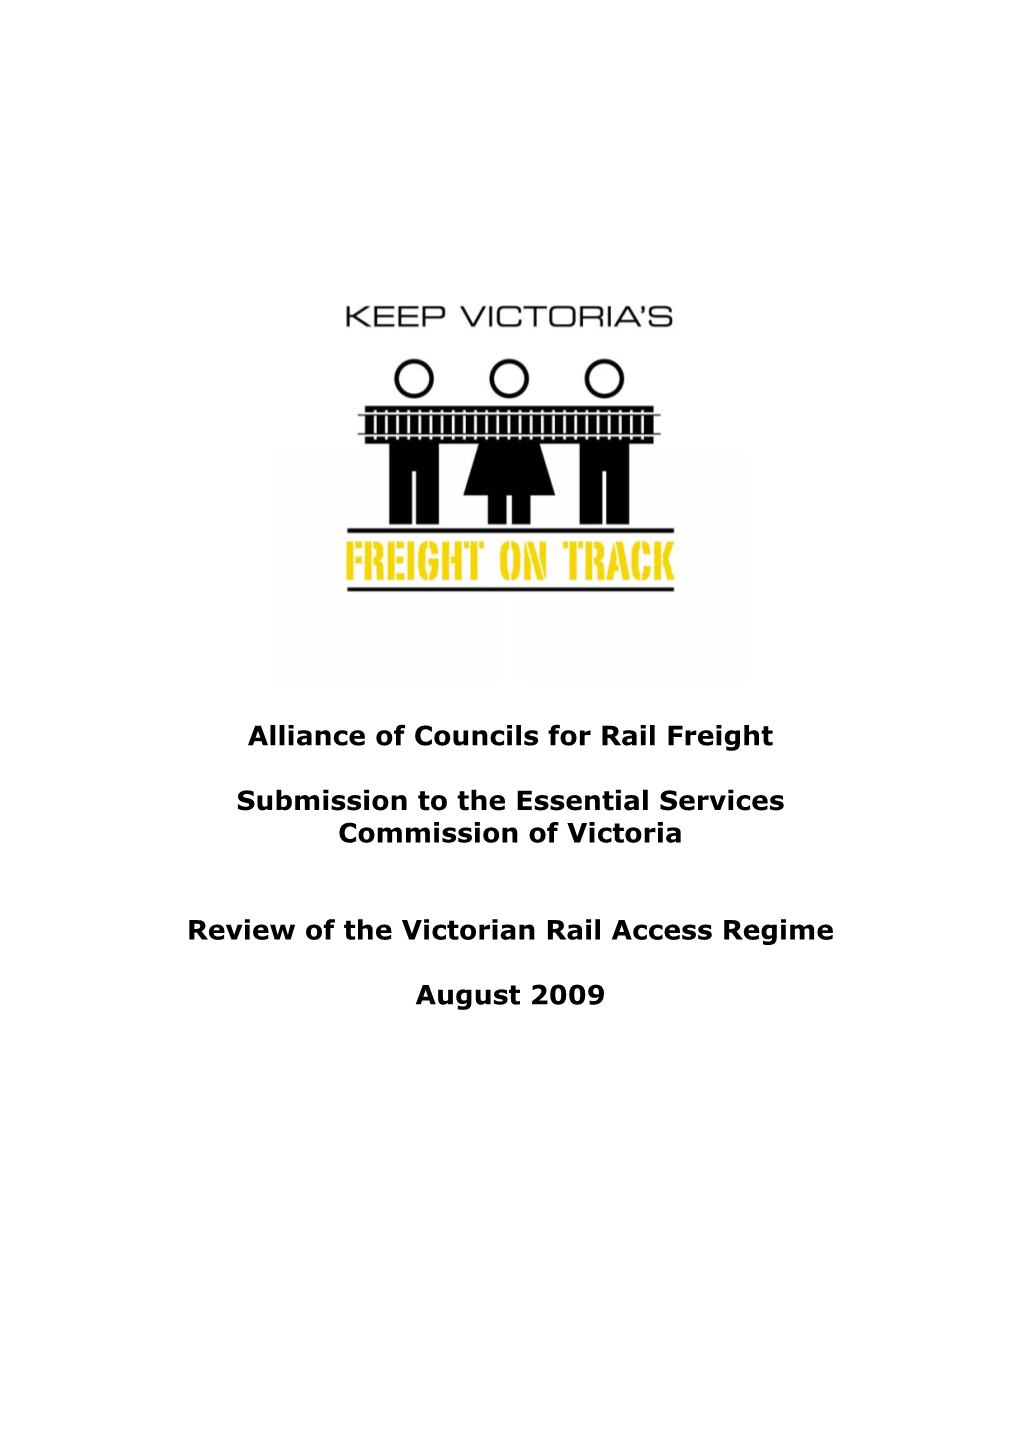 Alliance of Councils for Rail Freight Submission to the Essential